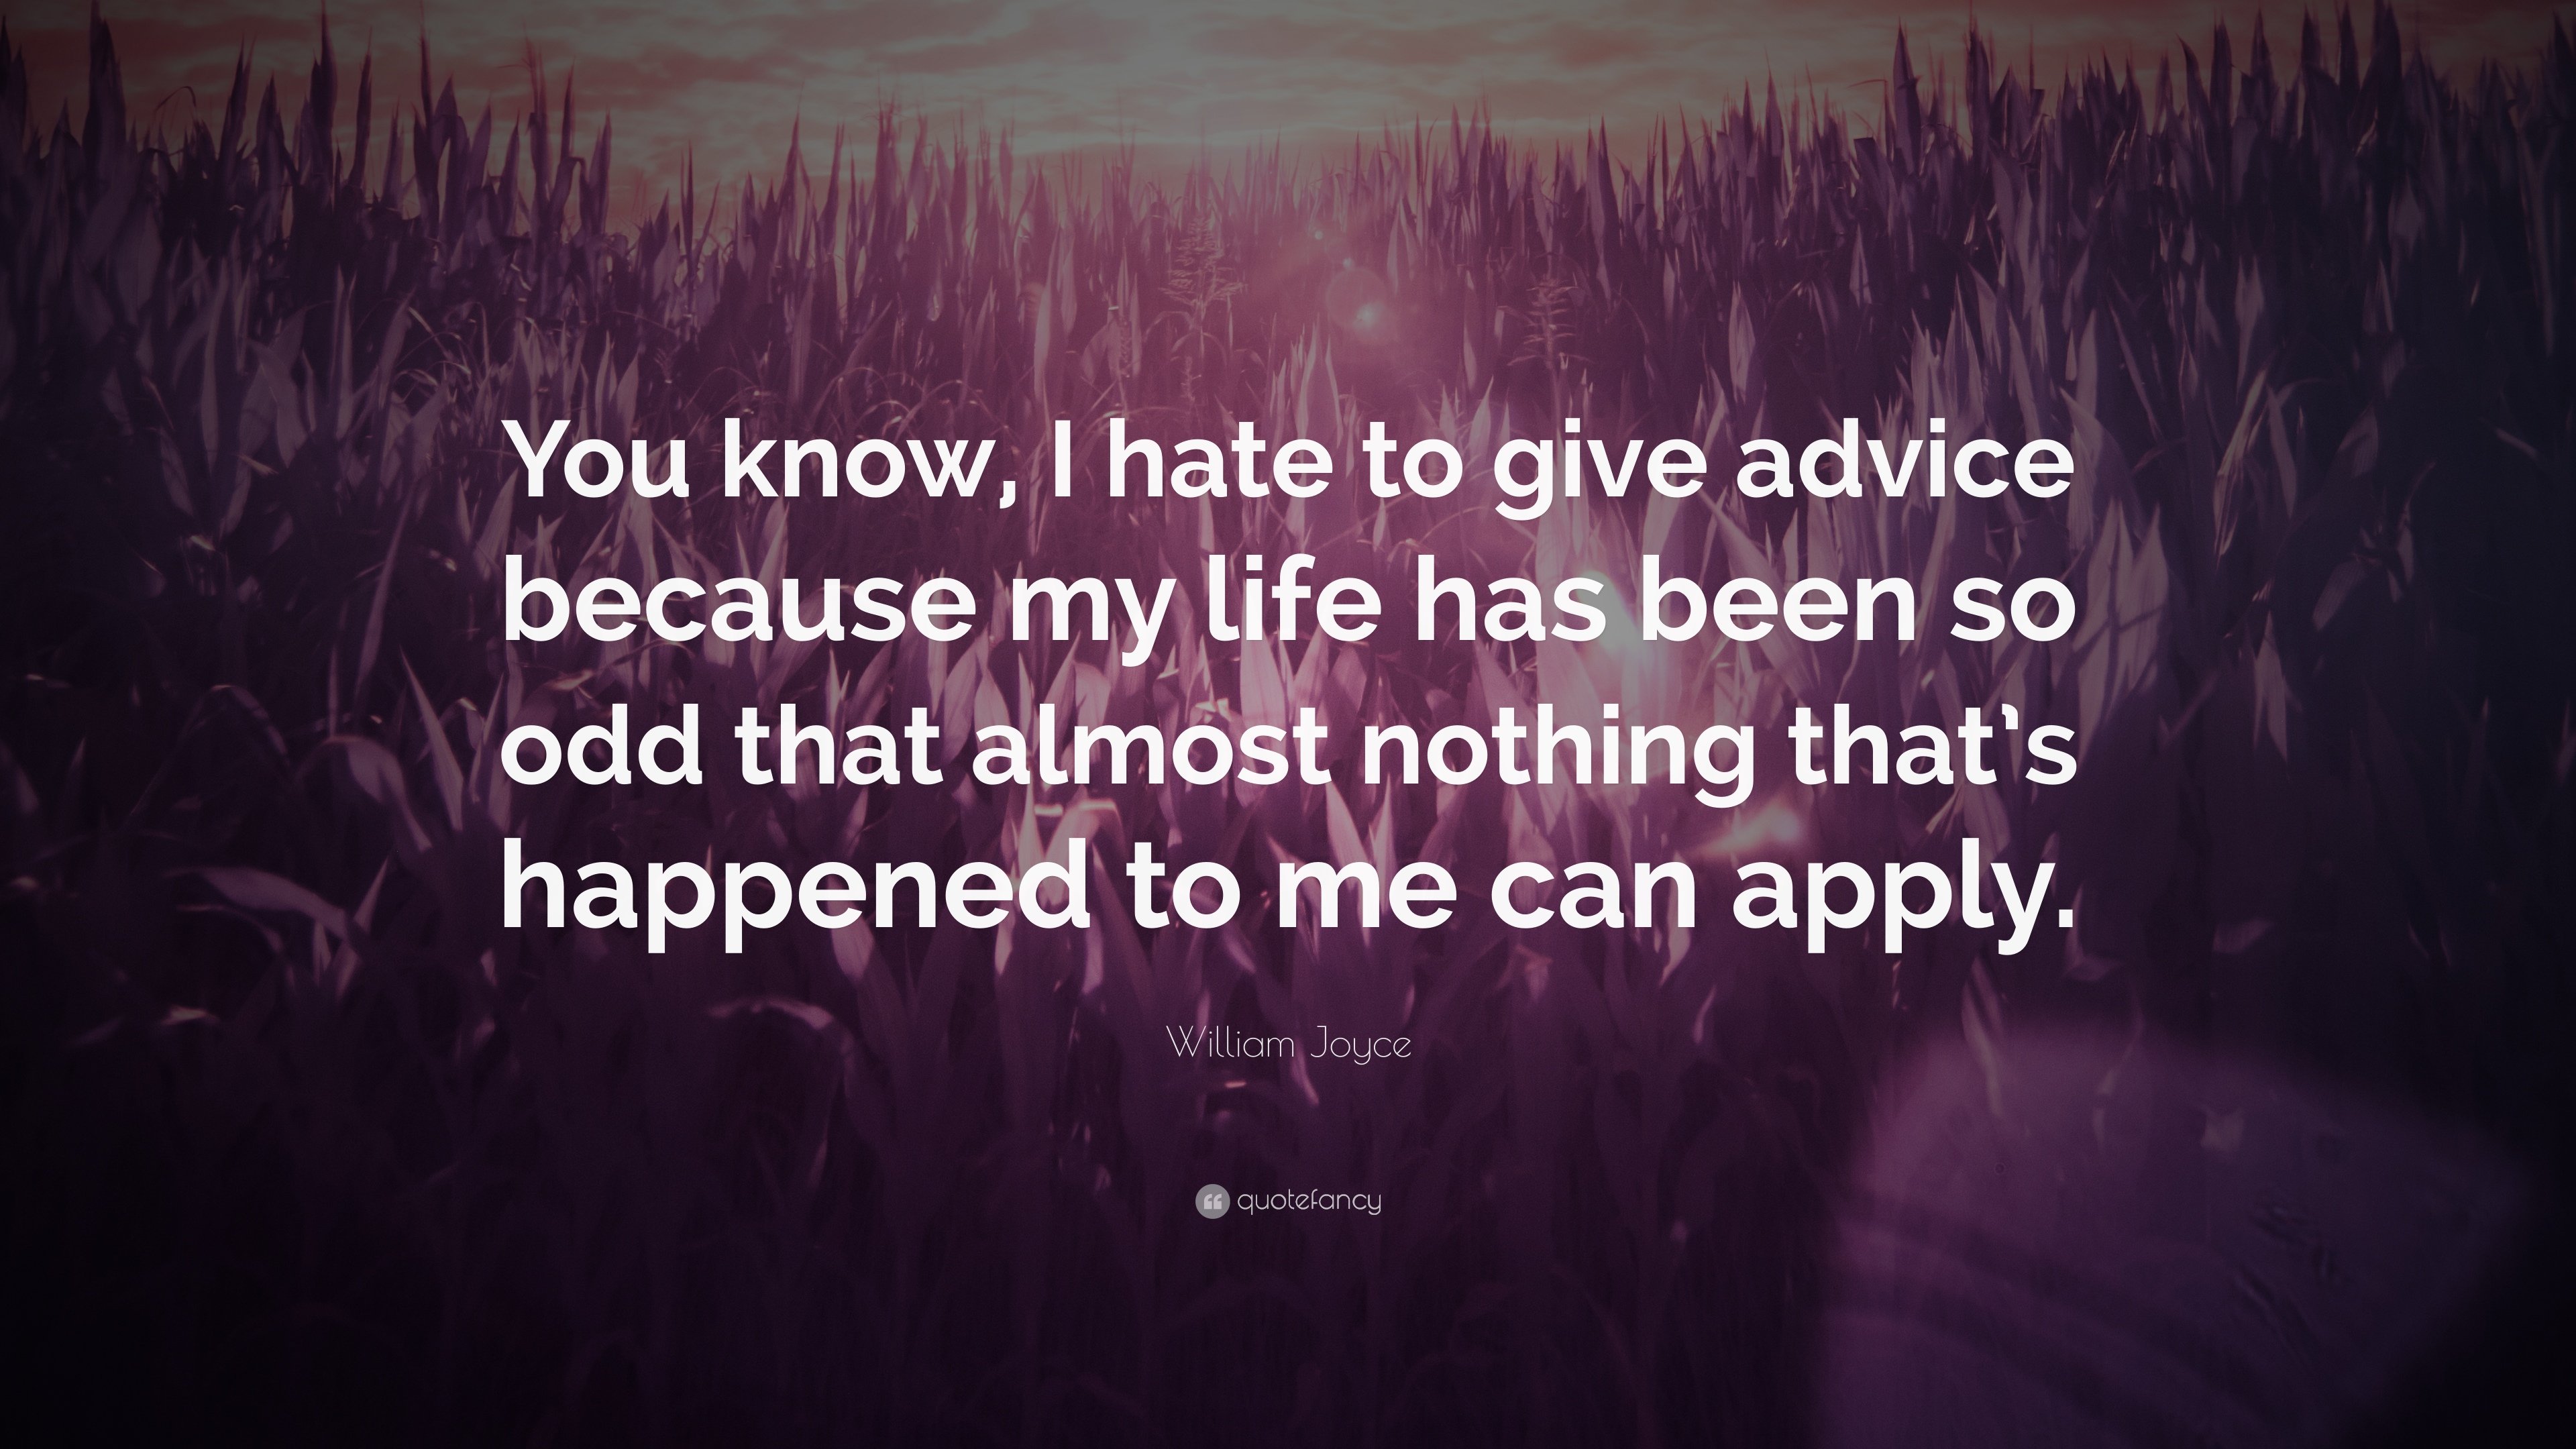 William Joyce Quote: “You know, I hate to give advice because my